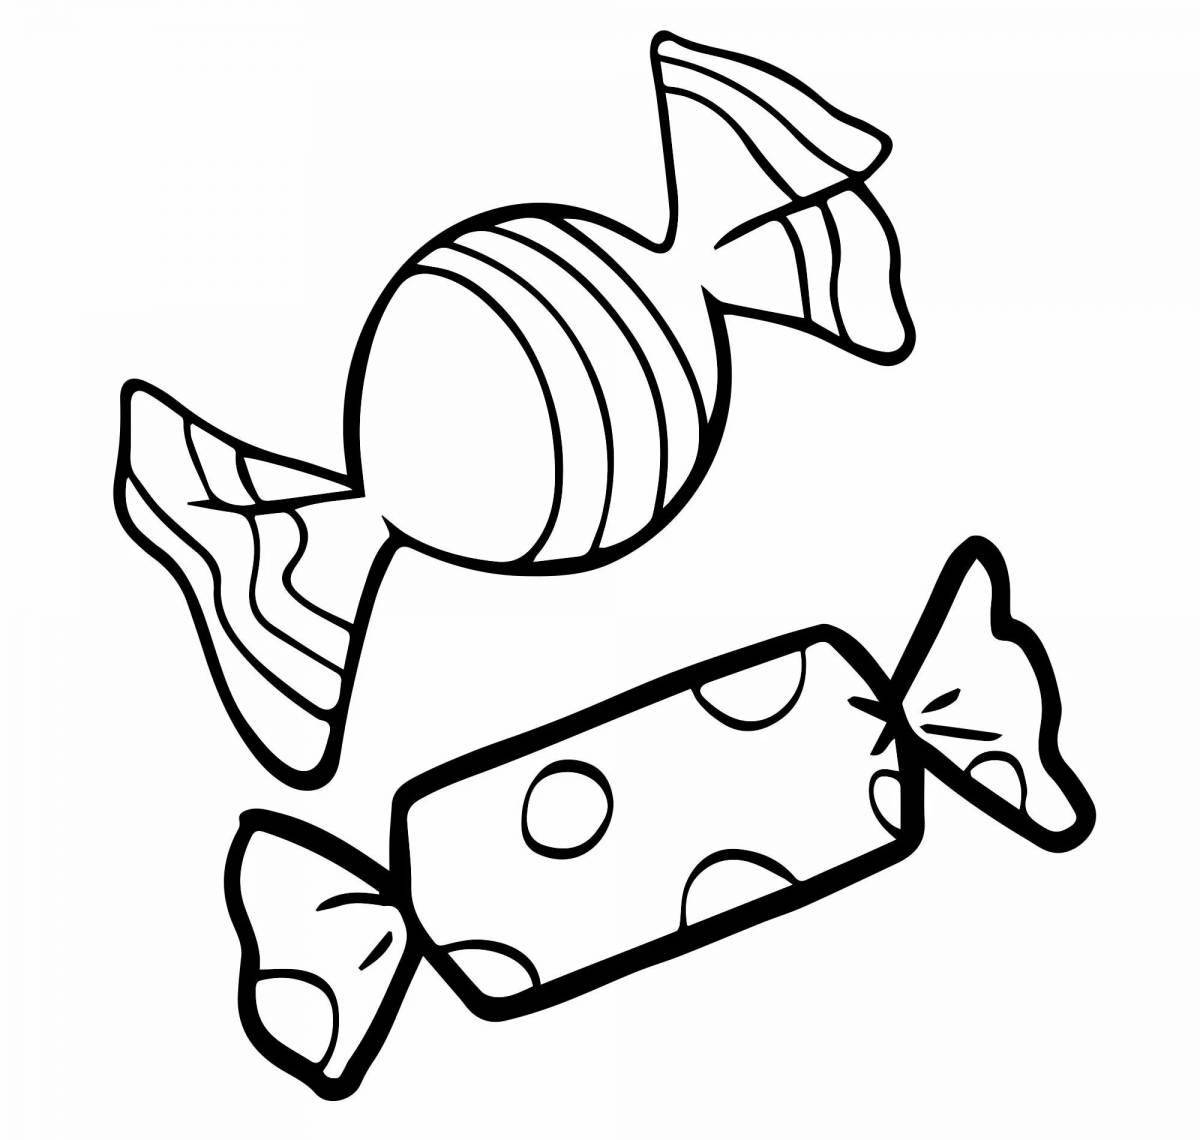 Fun candy coloring page